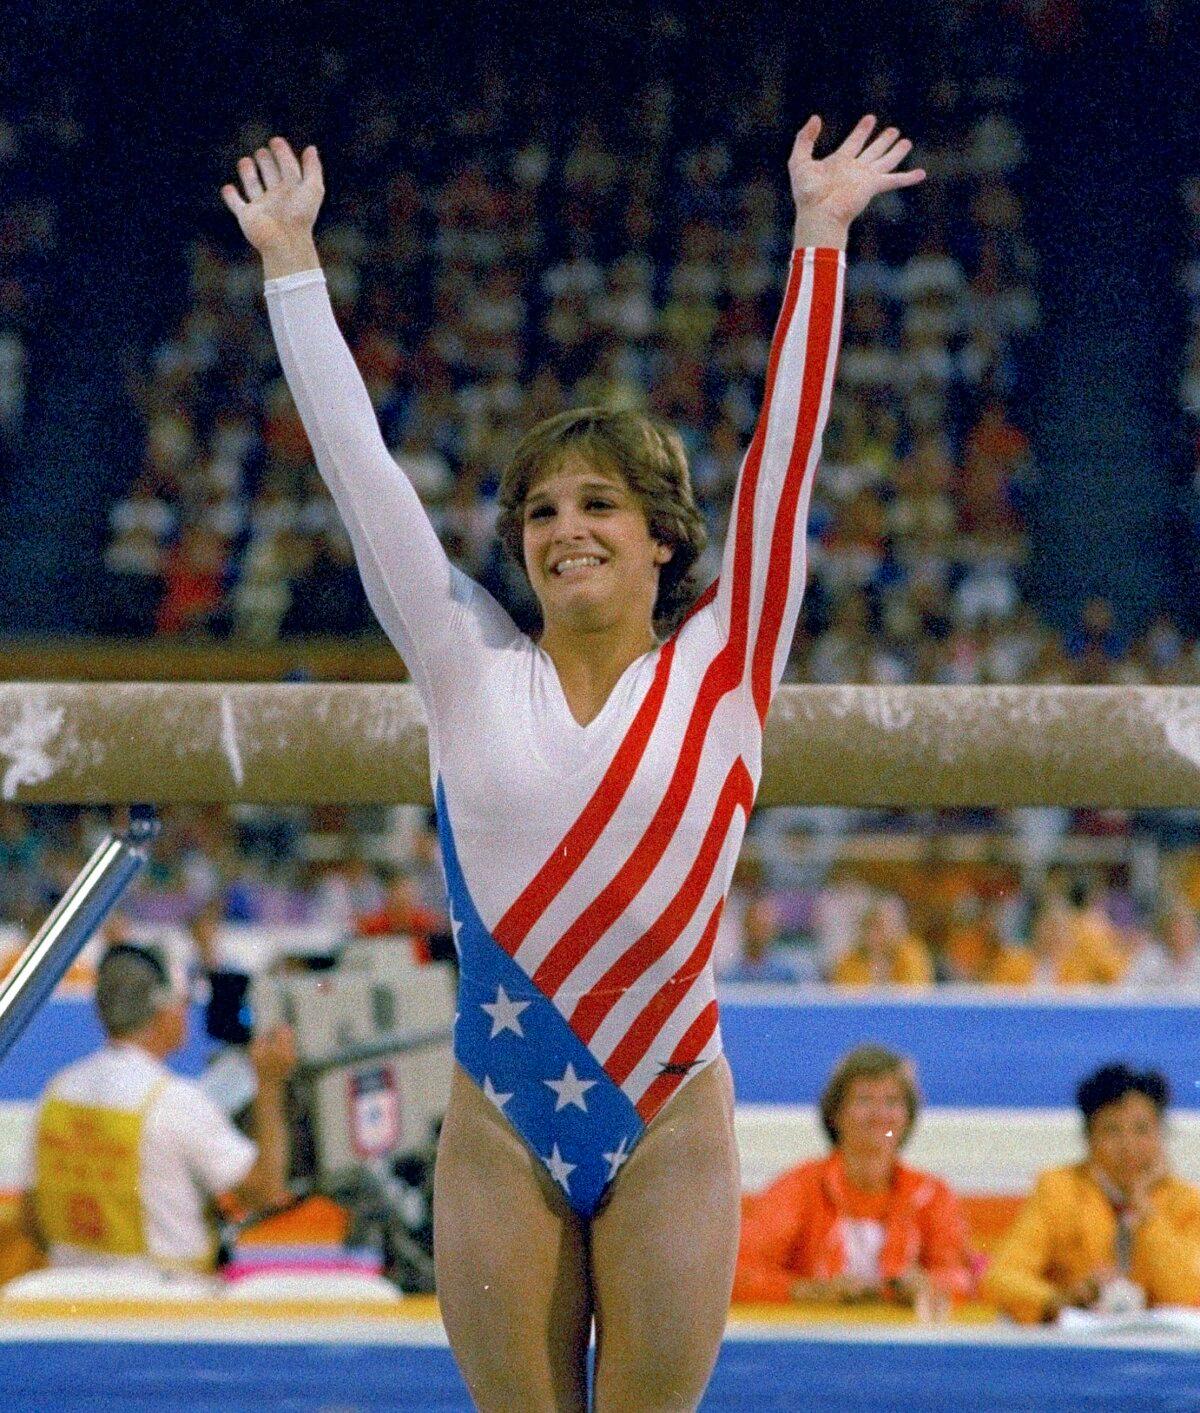 Mary Lou Retton reacts to applause after her performance at the Summer Olympics in Los Angeles on Aug. 3, 1984. (Suzanne Vlamis/AP Photo)